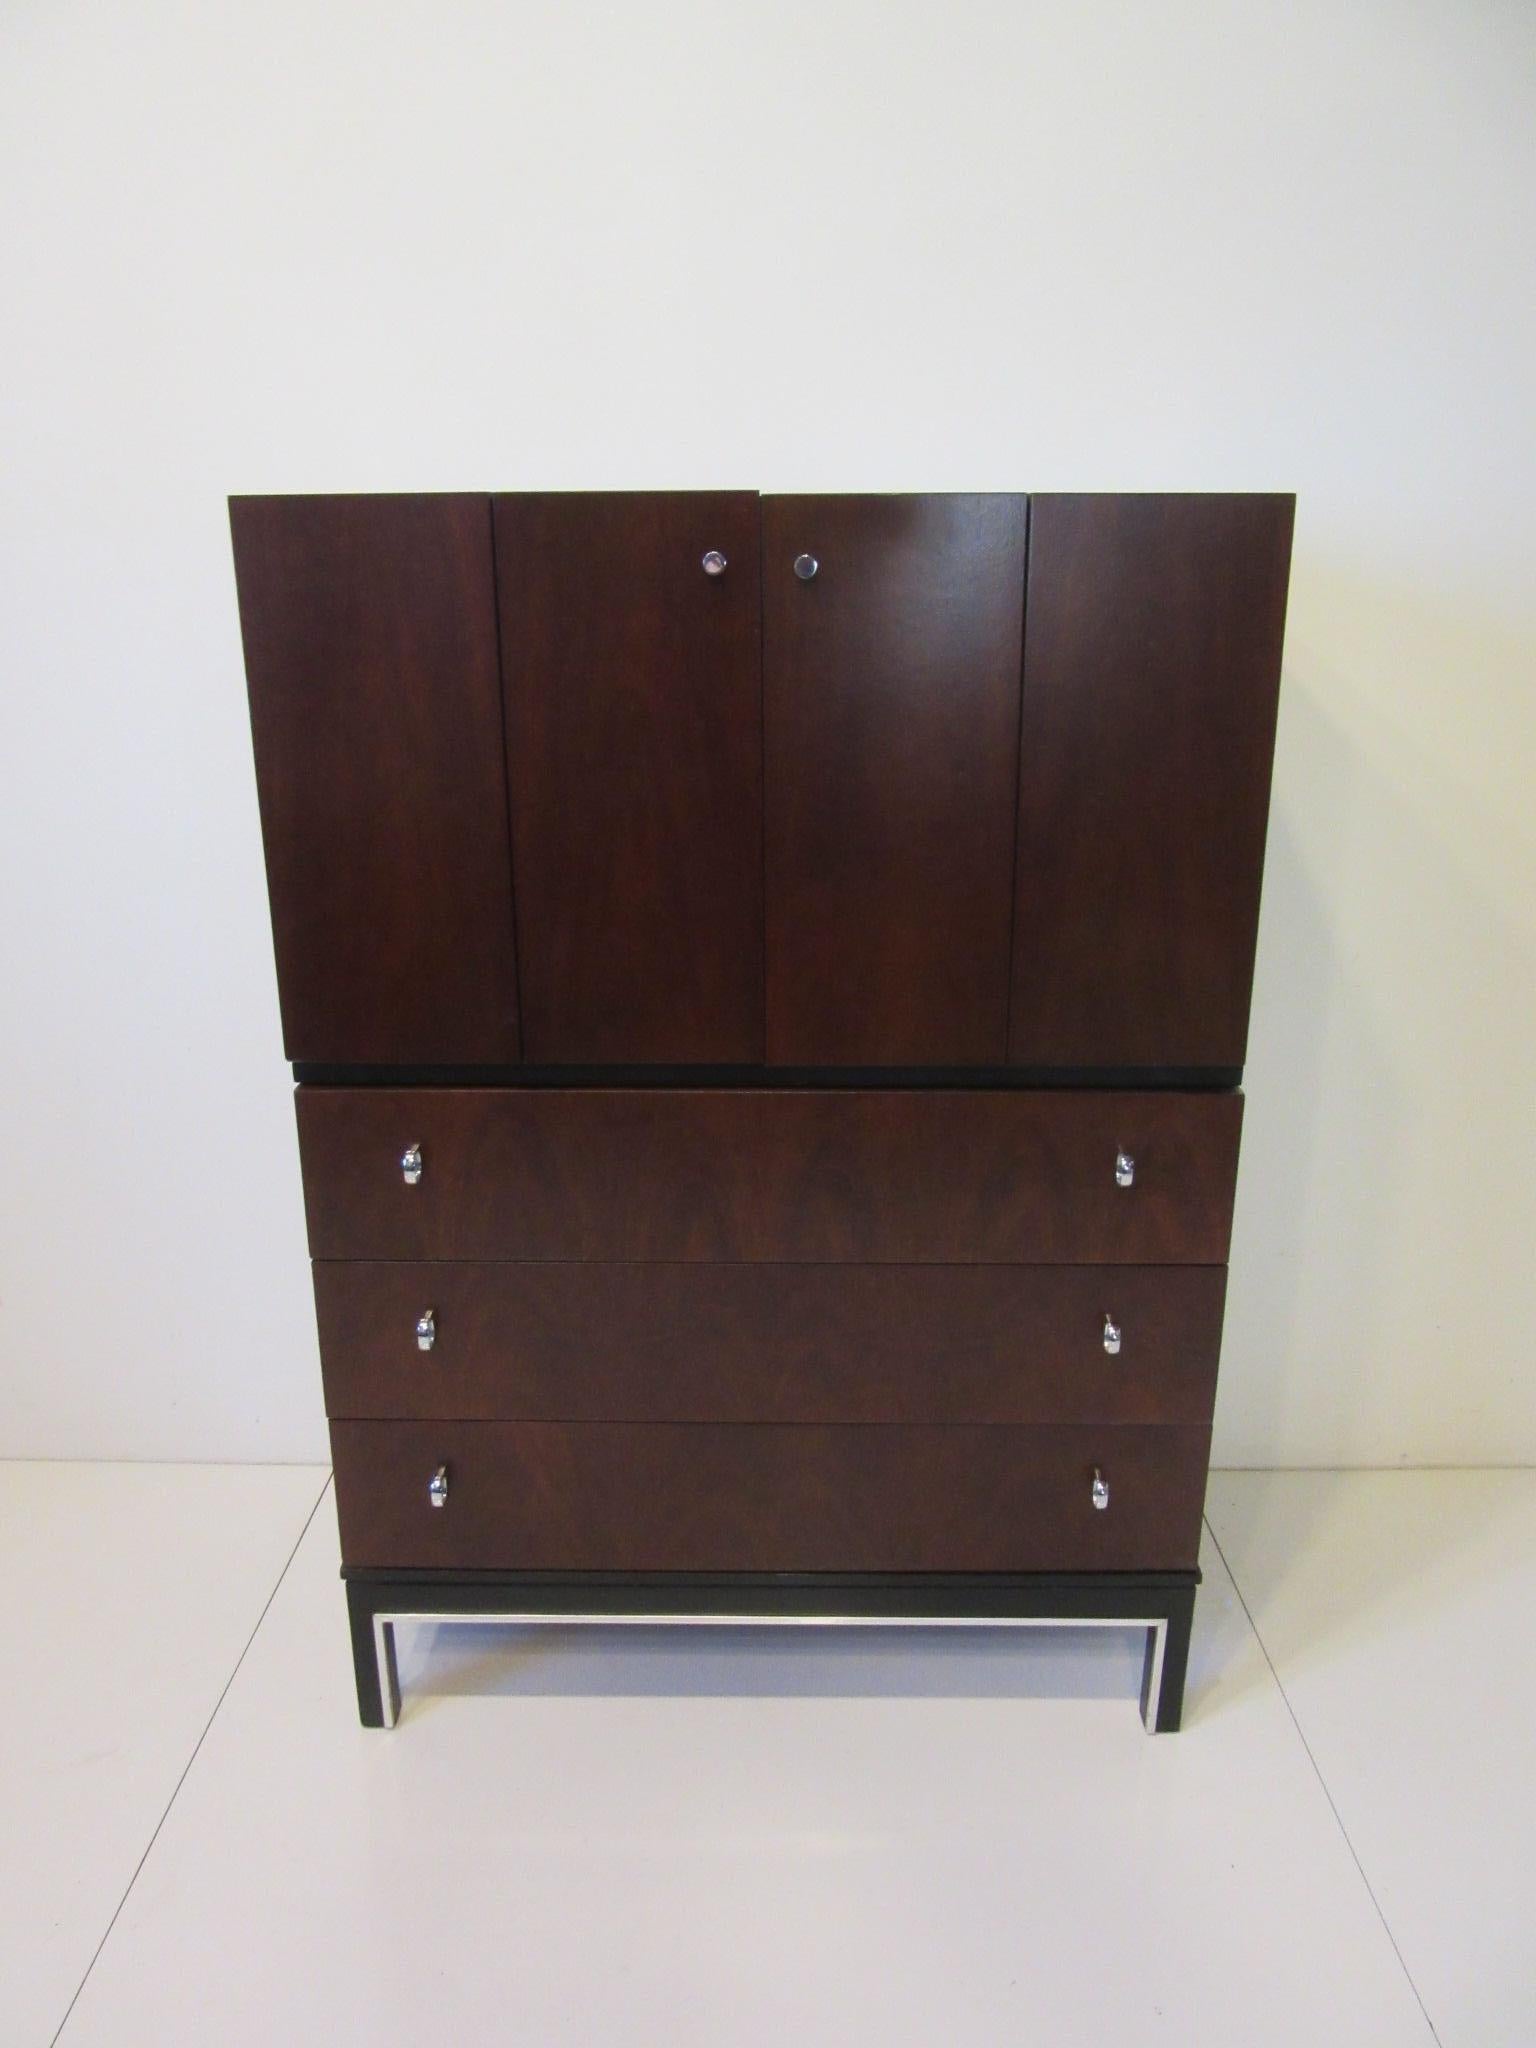 A well grained rosewood and ebony toned tall dresser chest with upper bi fold doors having storage sections and a drawer. The lower area has three drawers with chrome pulls and aluminum trim to the stretcher and leg area, retains the manufactures